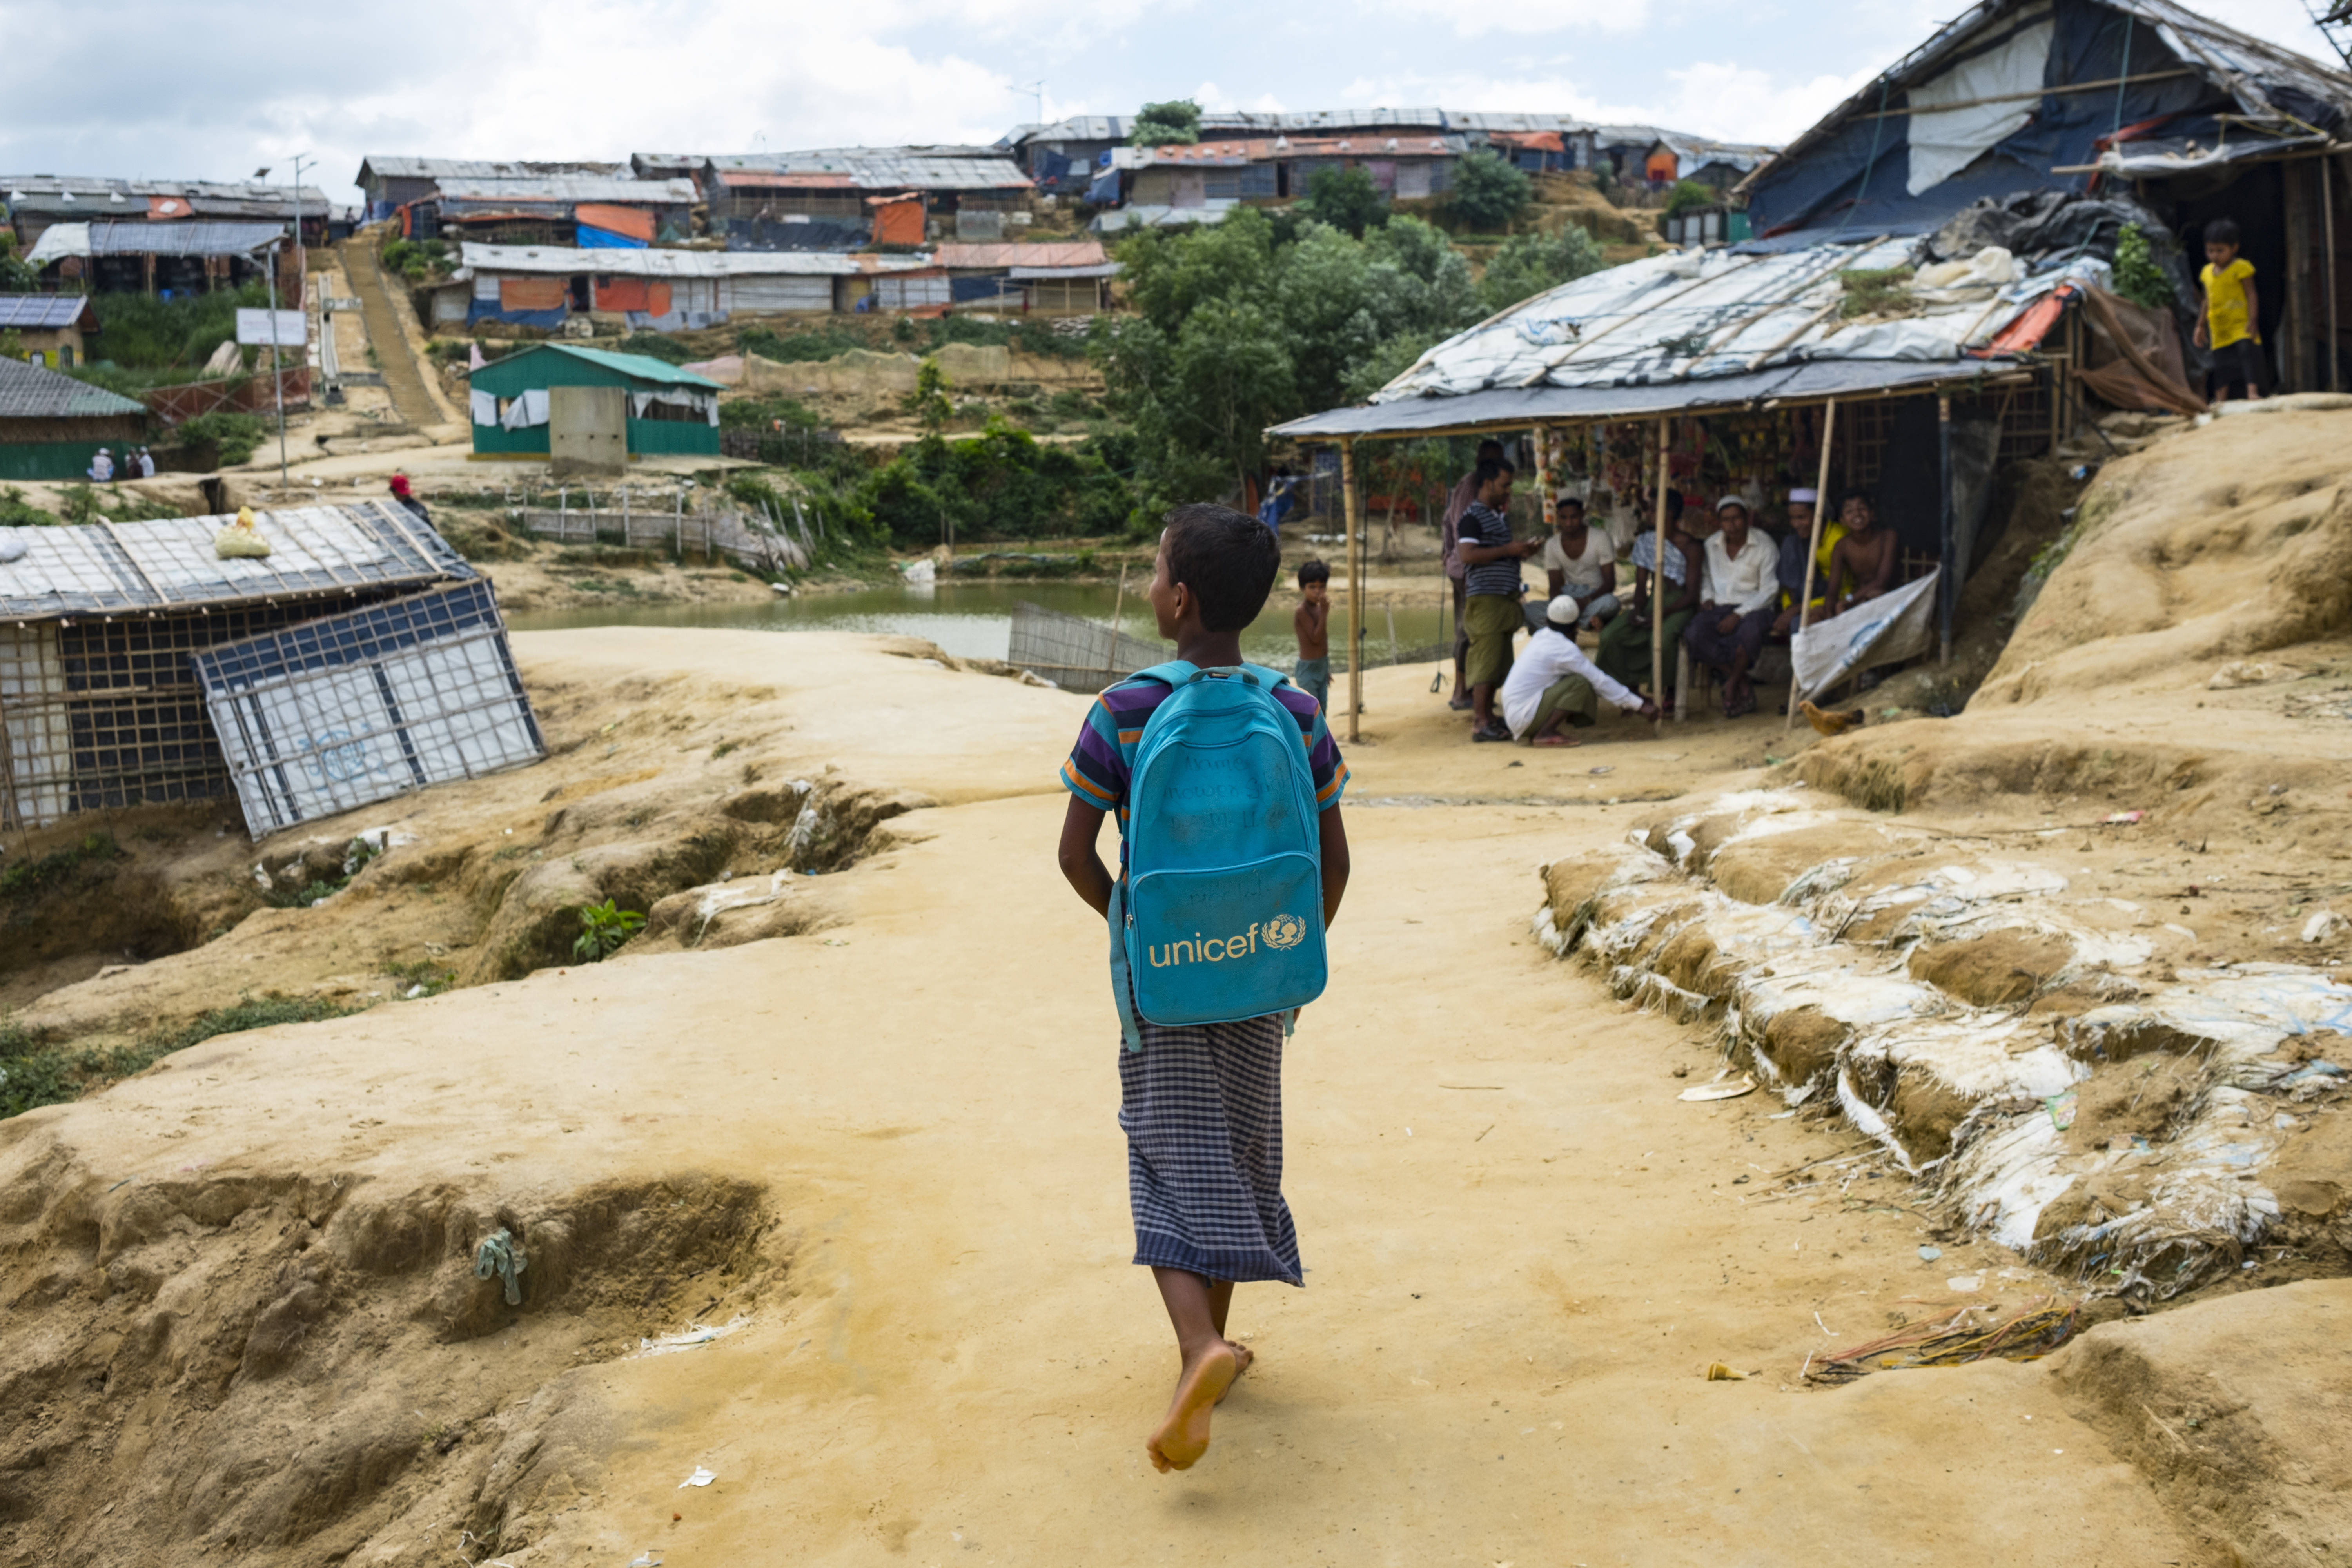 On 20 June 2019, a young student walks to a UNICEF learning centre in the Kutupalong refugee camp in Cox’s Bazar, Bangladesh.